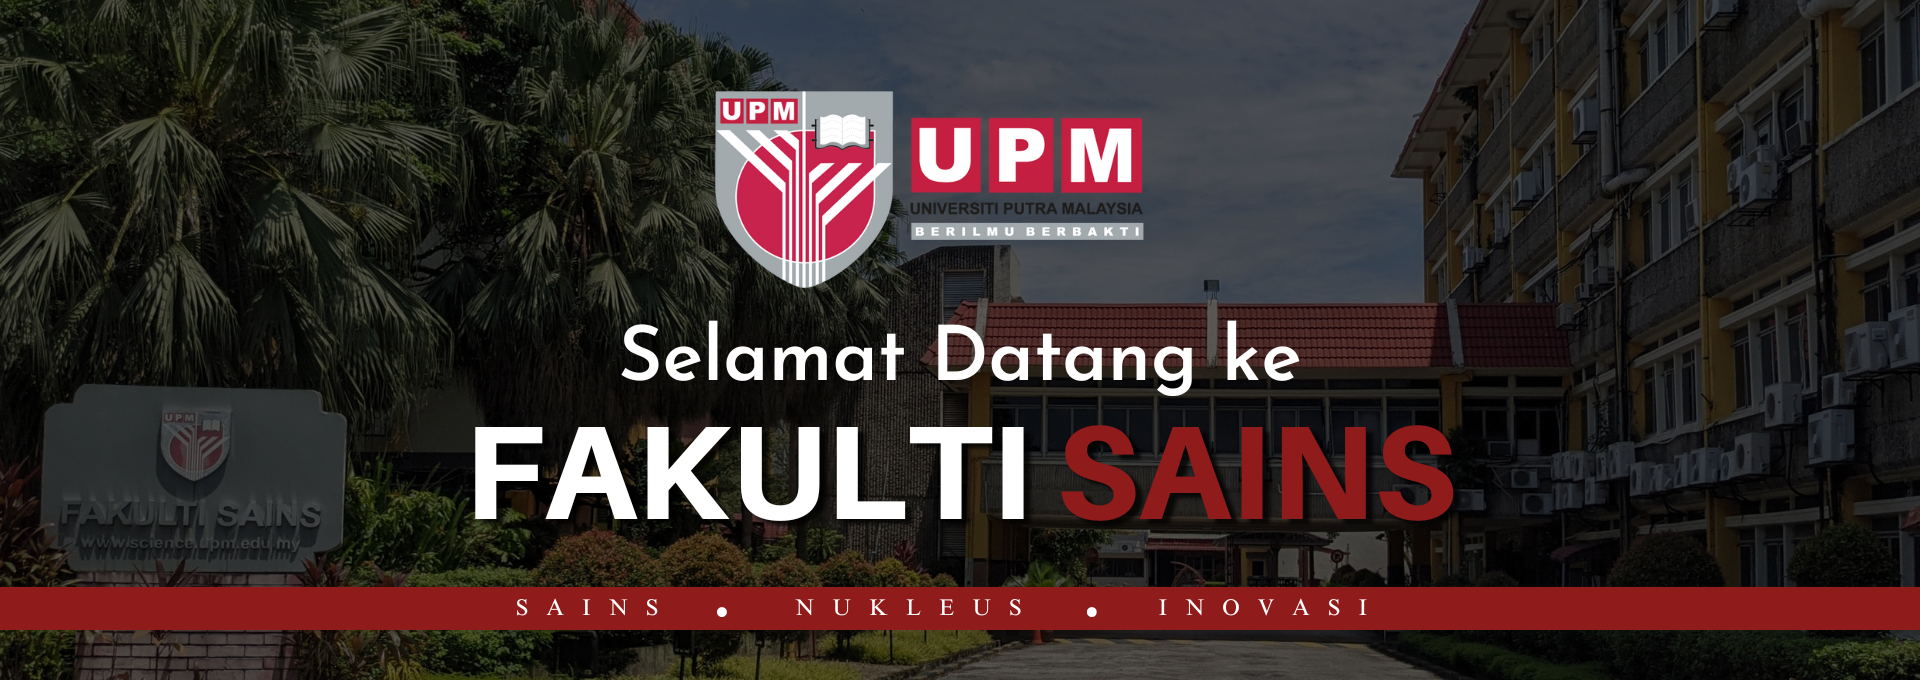 WELCOME TO FACULTY OF SCIENCE UPM